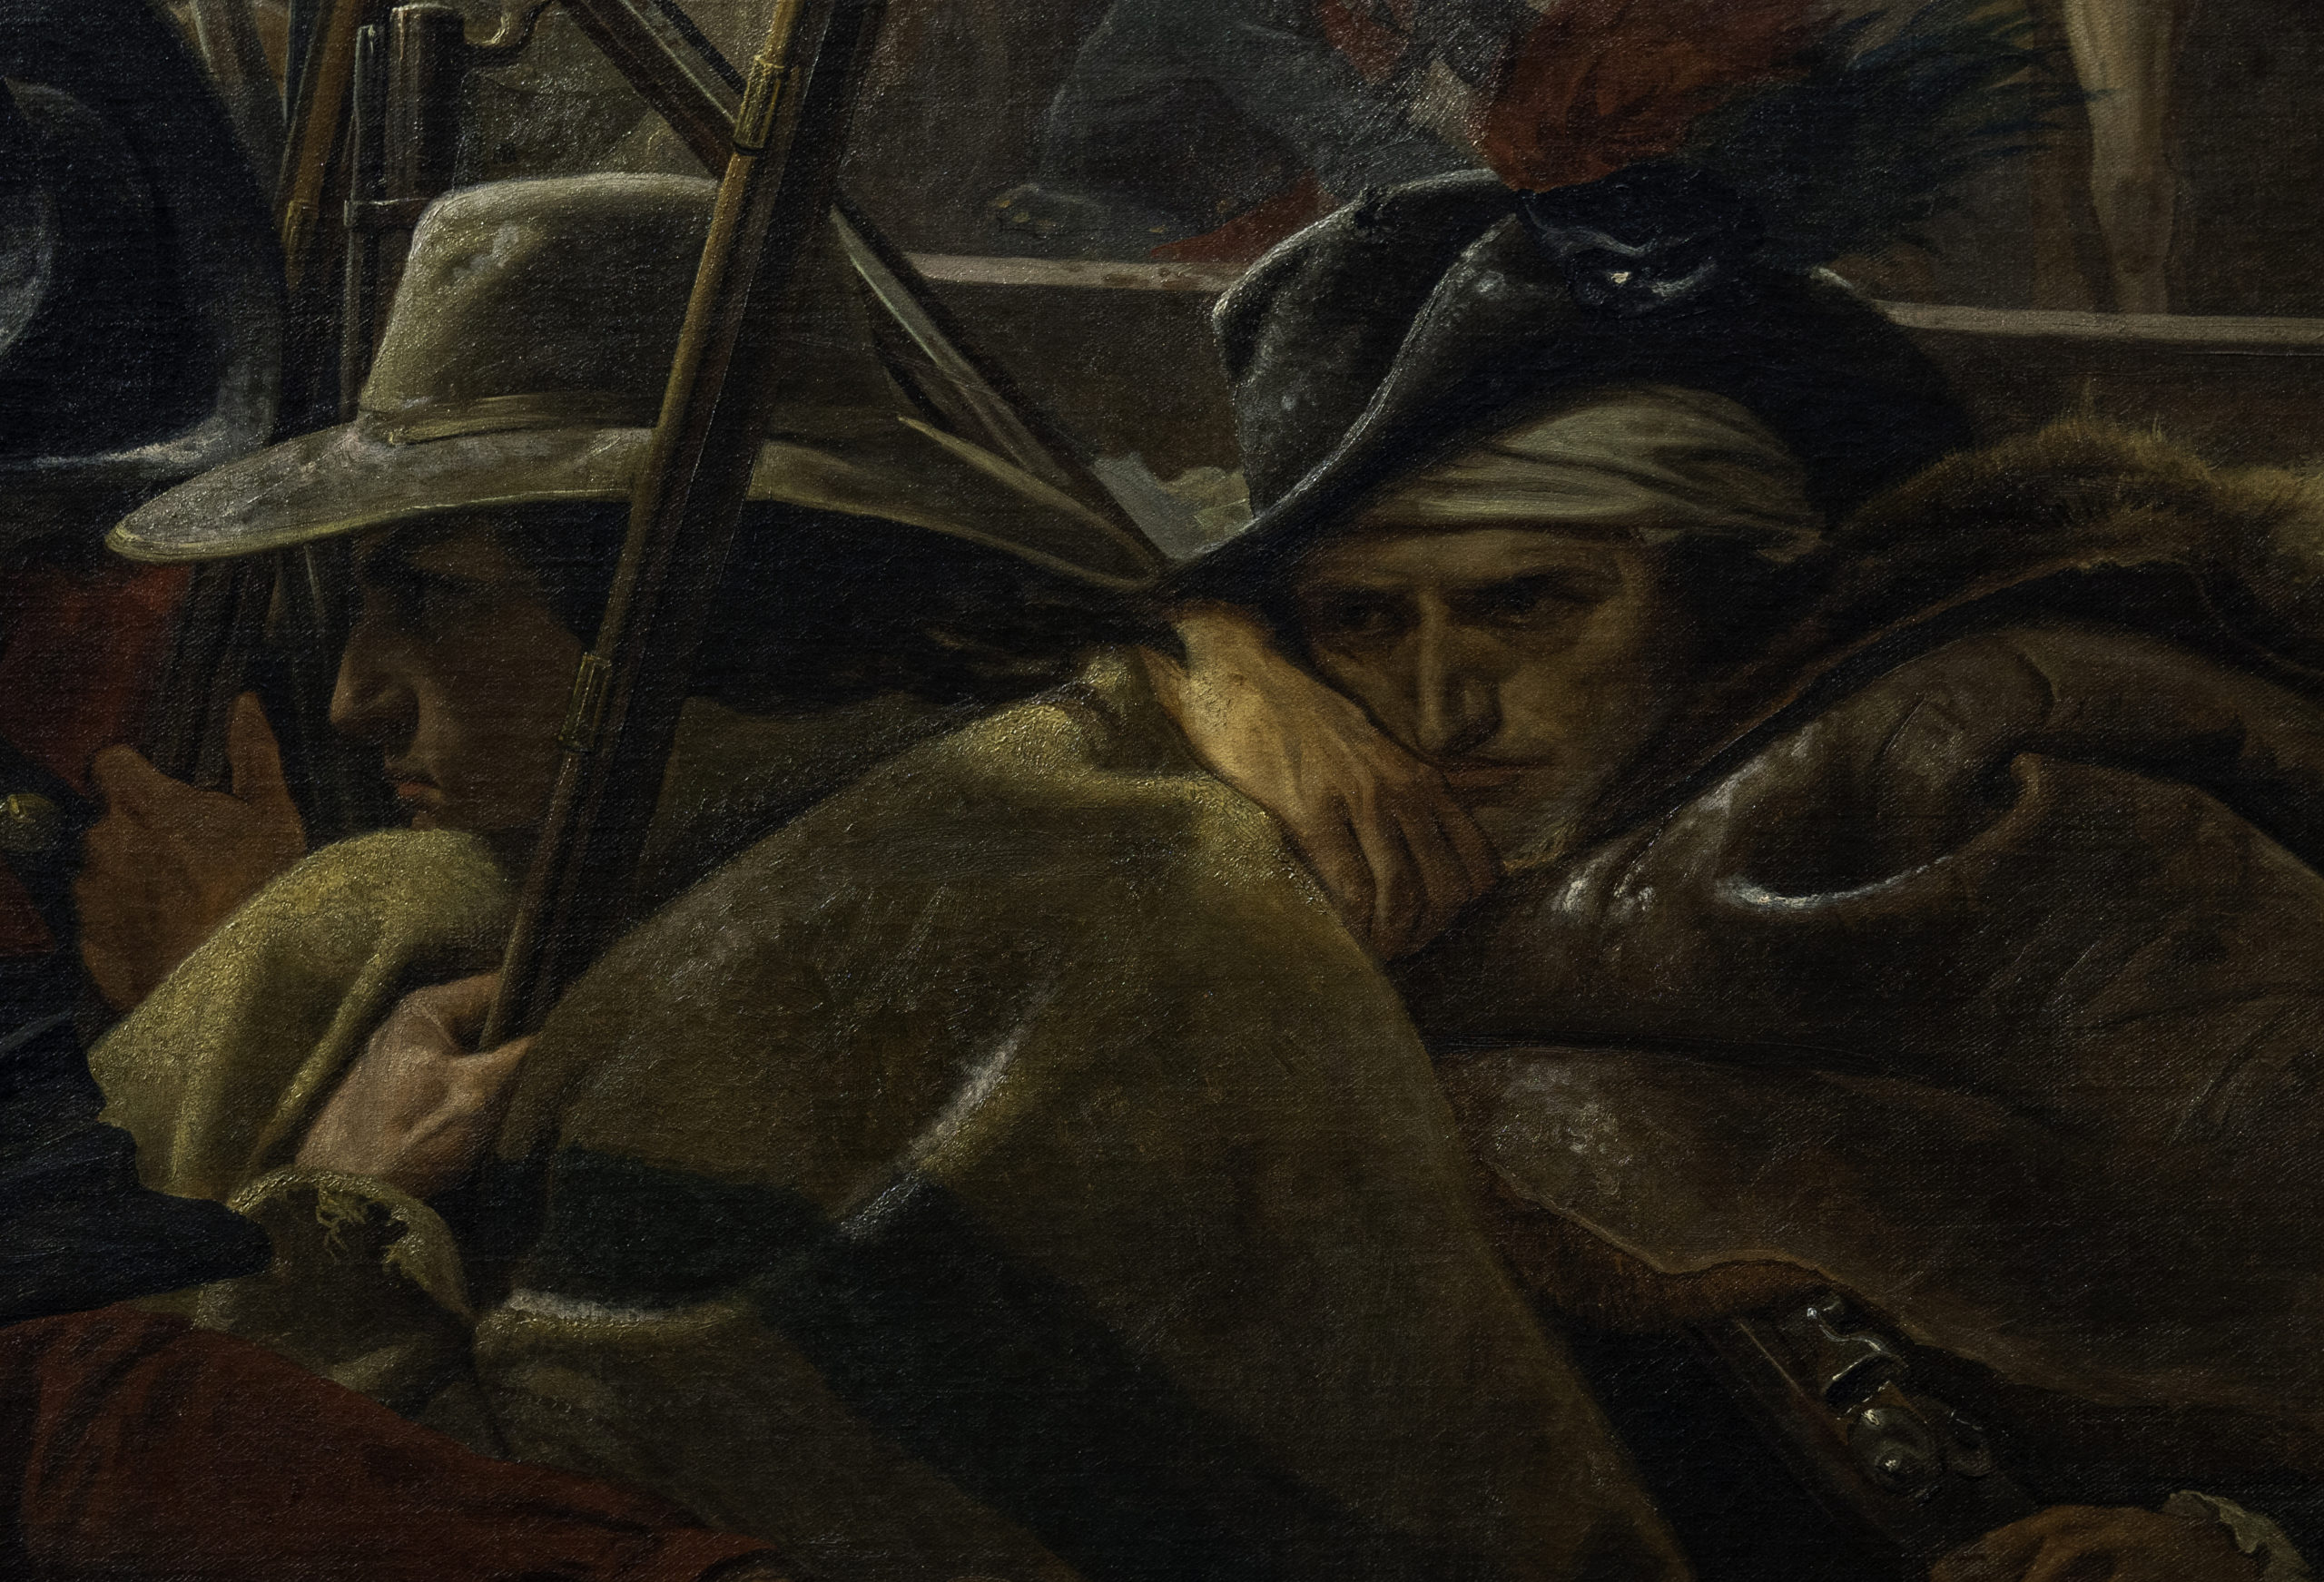 Farmers huddled against cold at middle of boat (detail) Emanuel Leutze, Washington Crossing the Delaware, 1851, oil on canvas, 378.5 x 647.7 cm (Metropolitan Museum of Art, photo: Steven Zucker, CC BY-NC-SA 2.0)